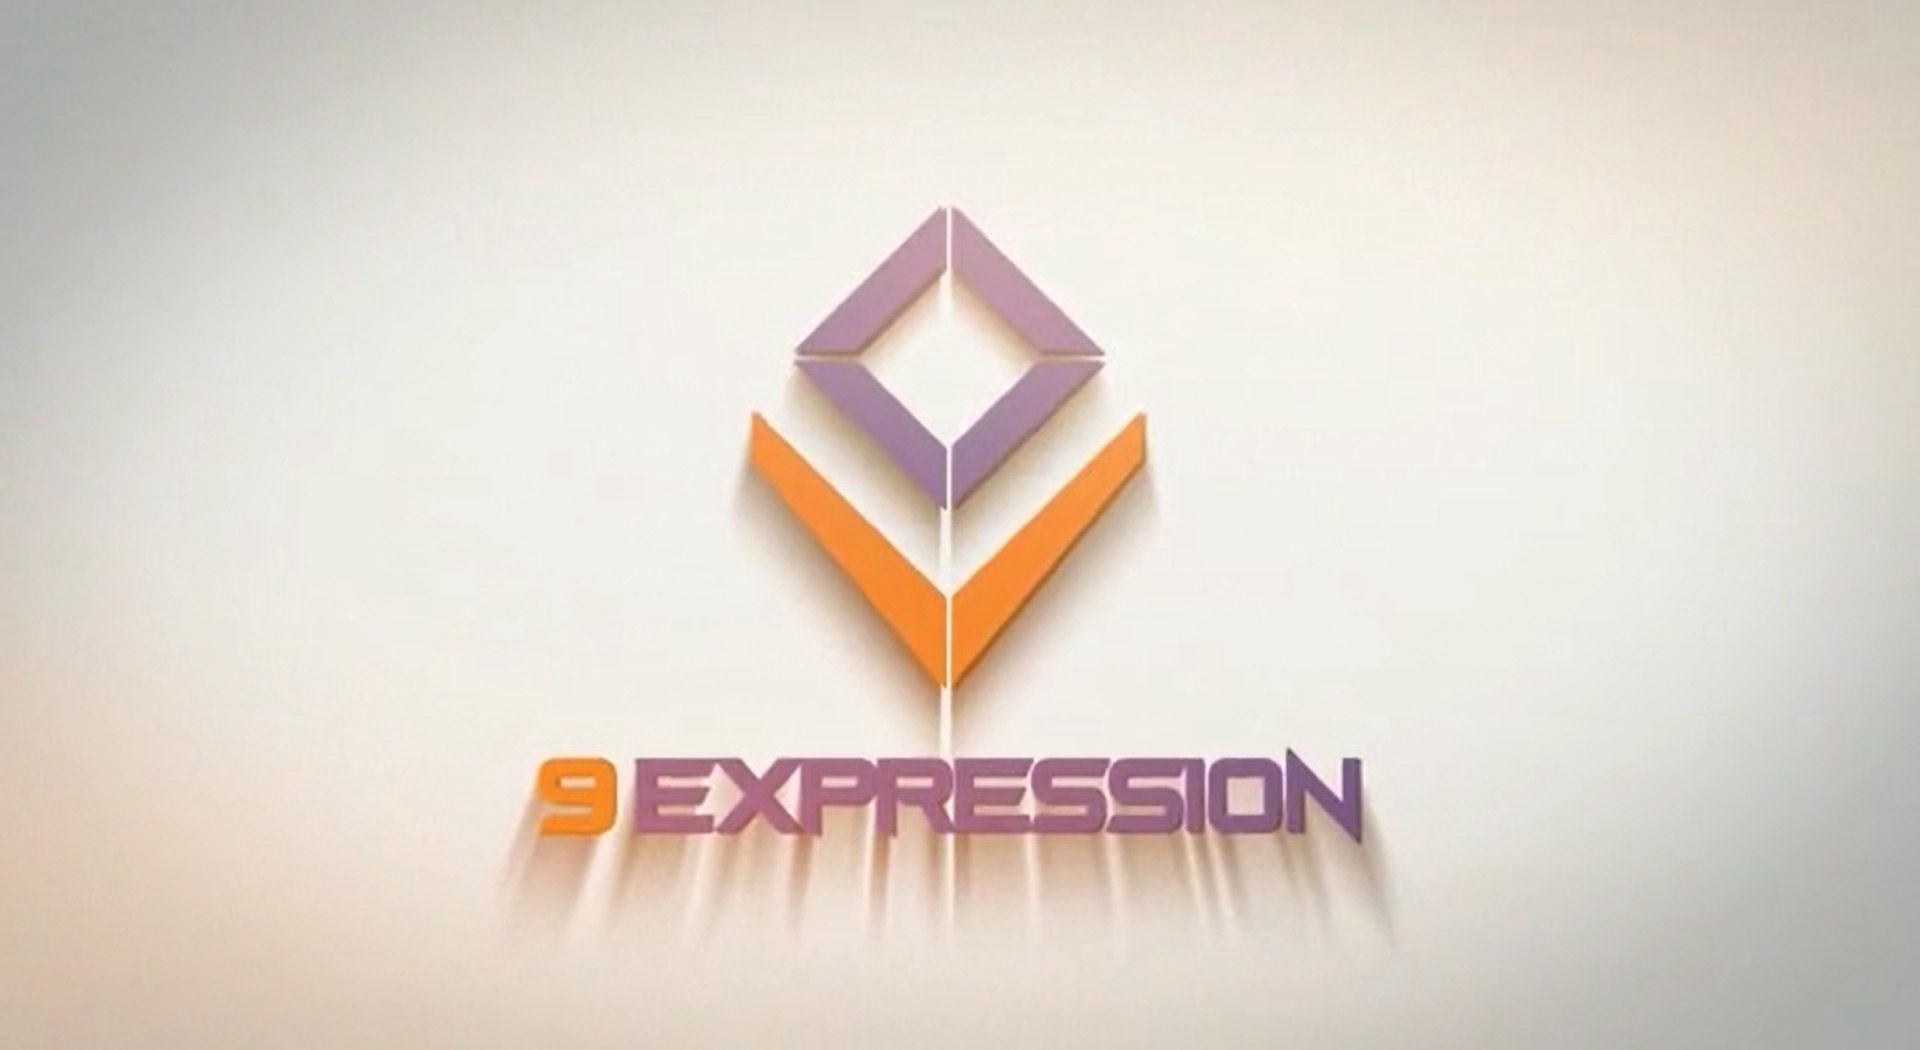 9 Expression